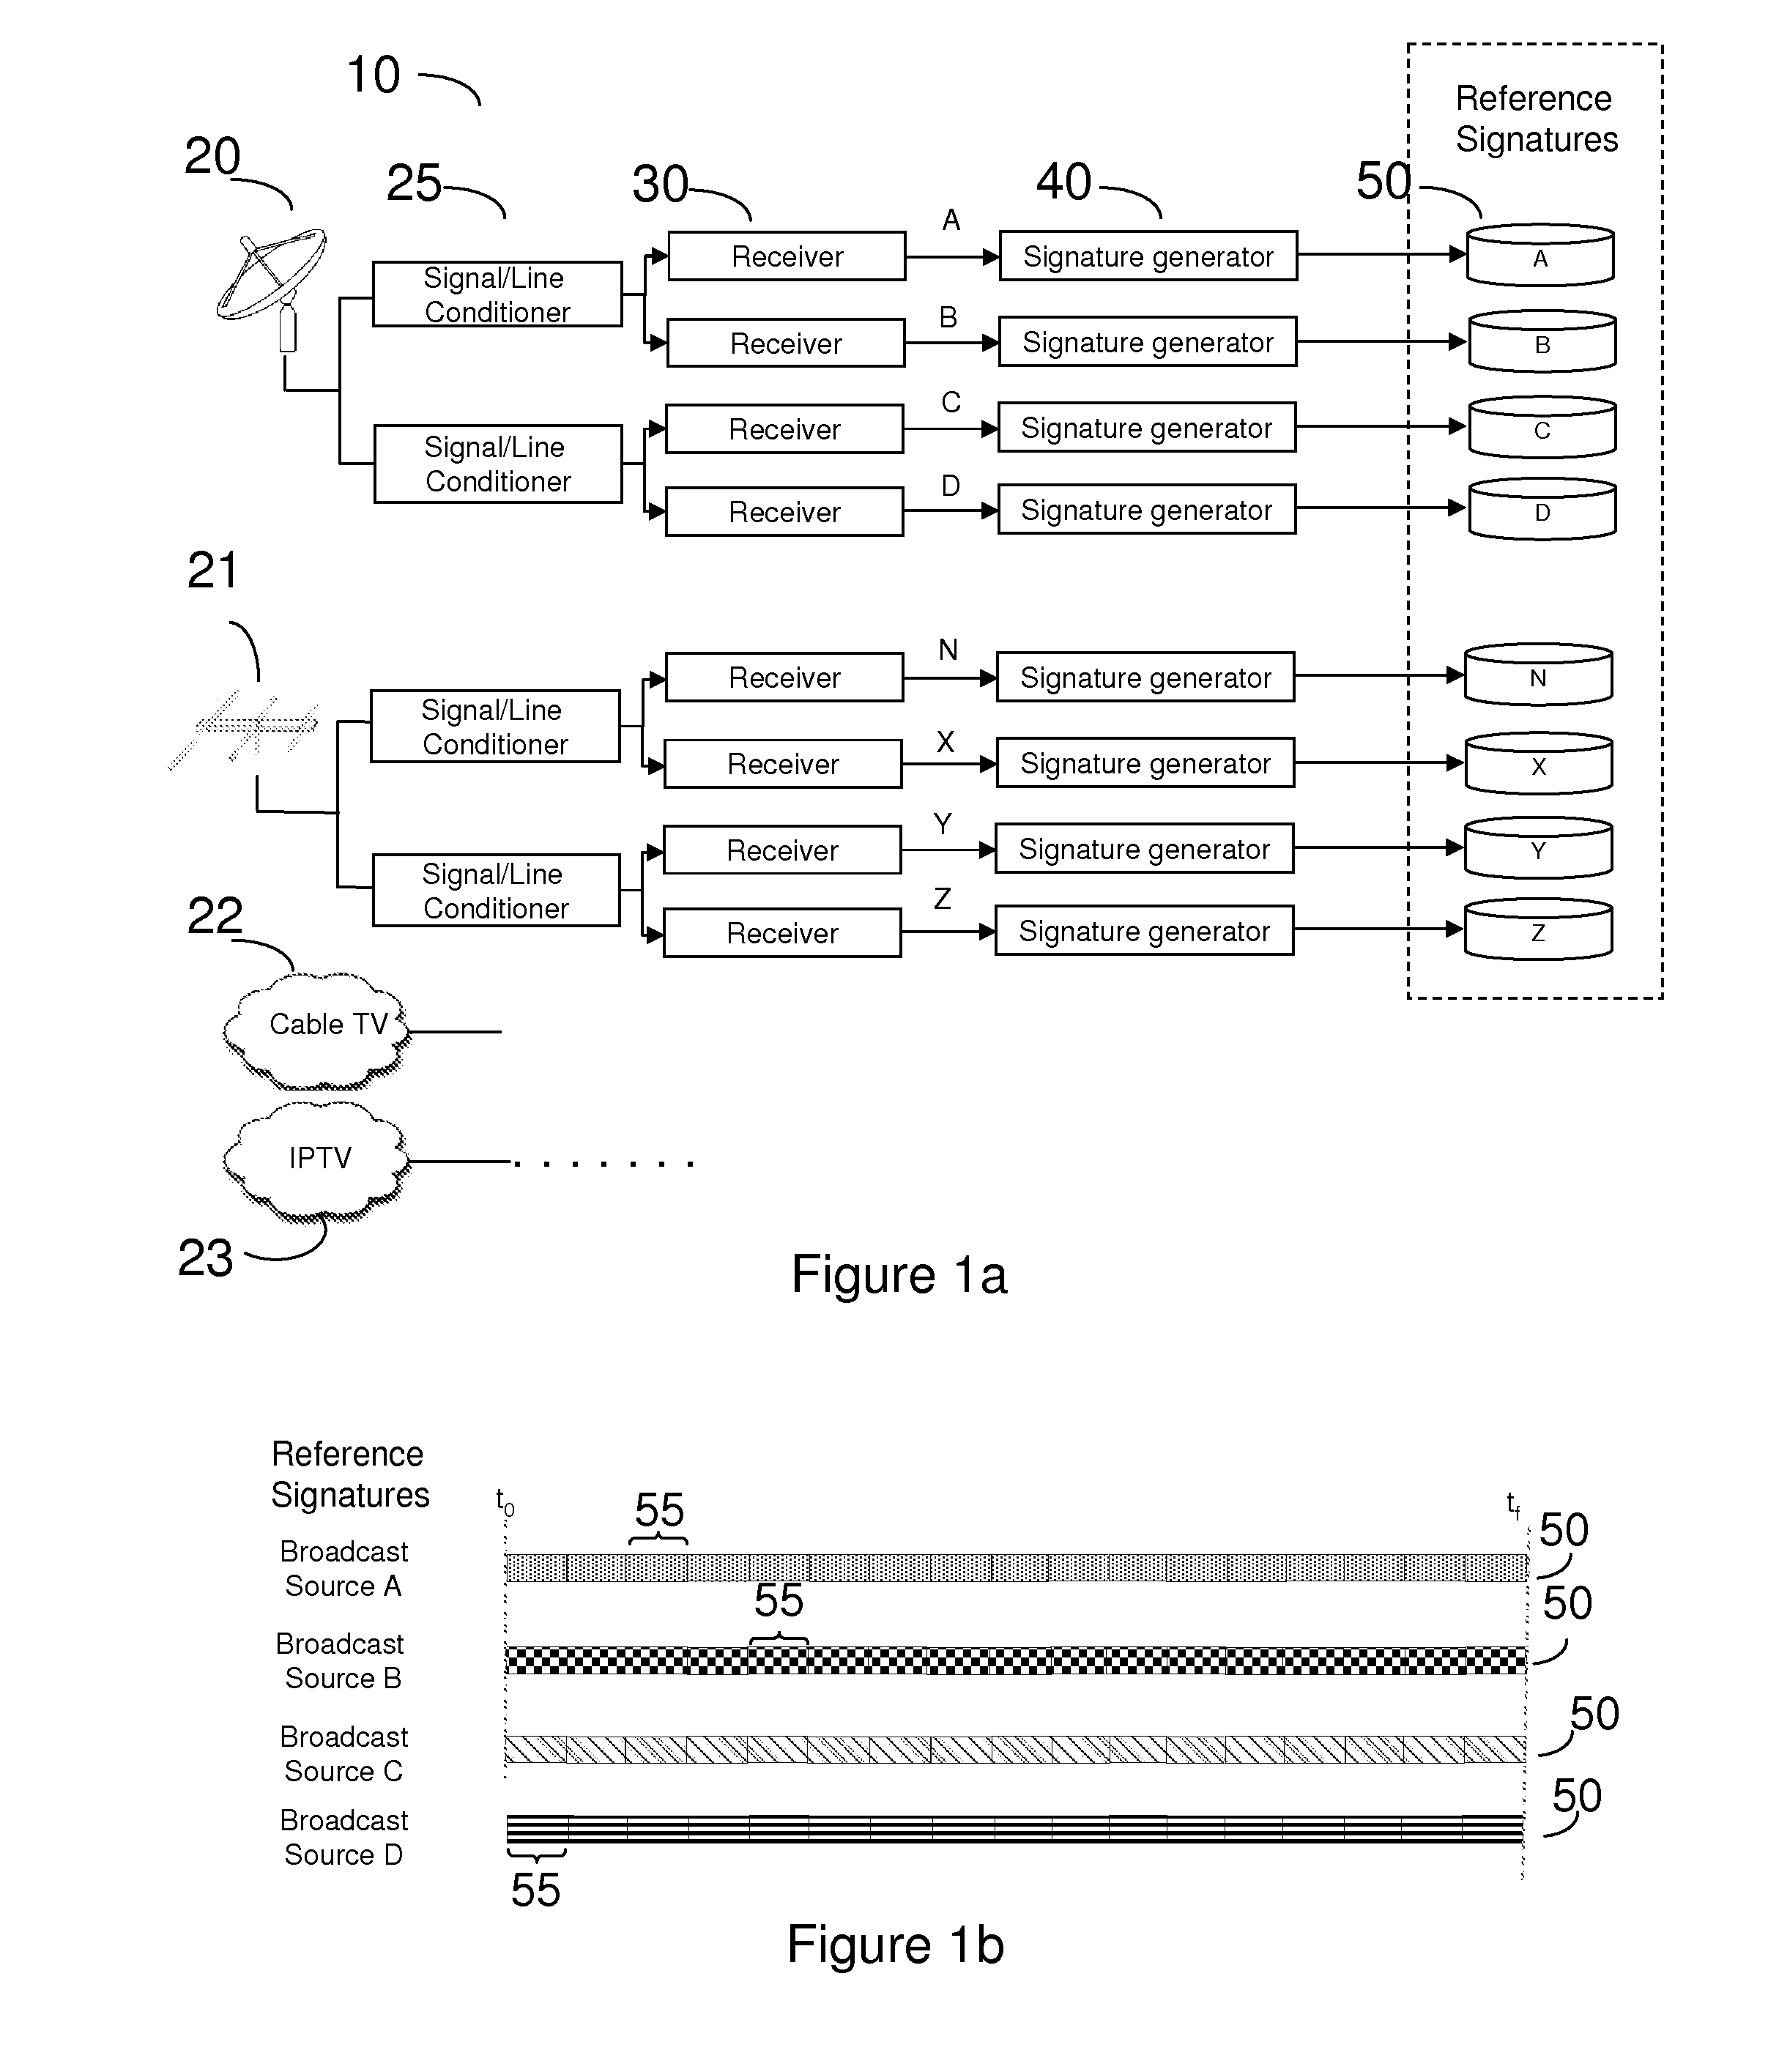 Audience measurement apparatus, system and method